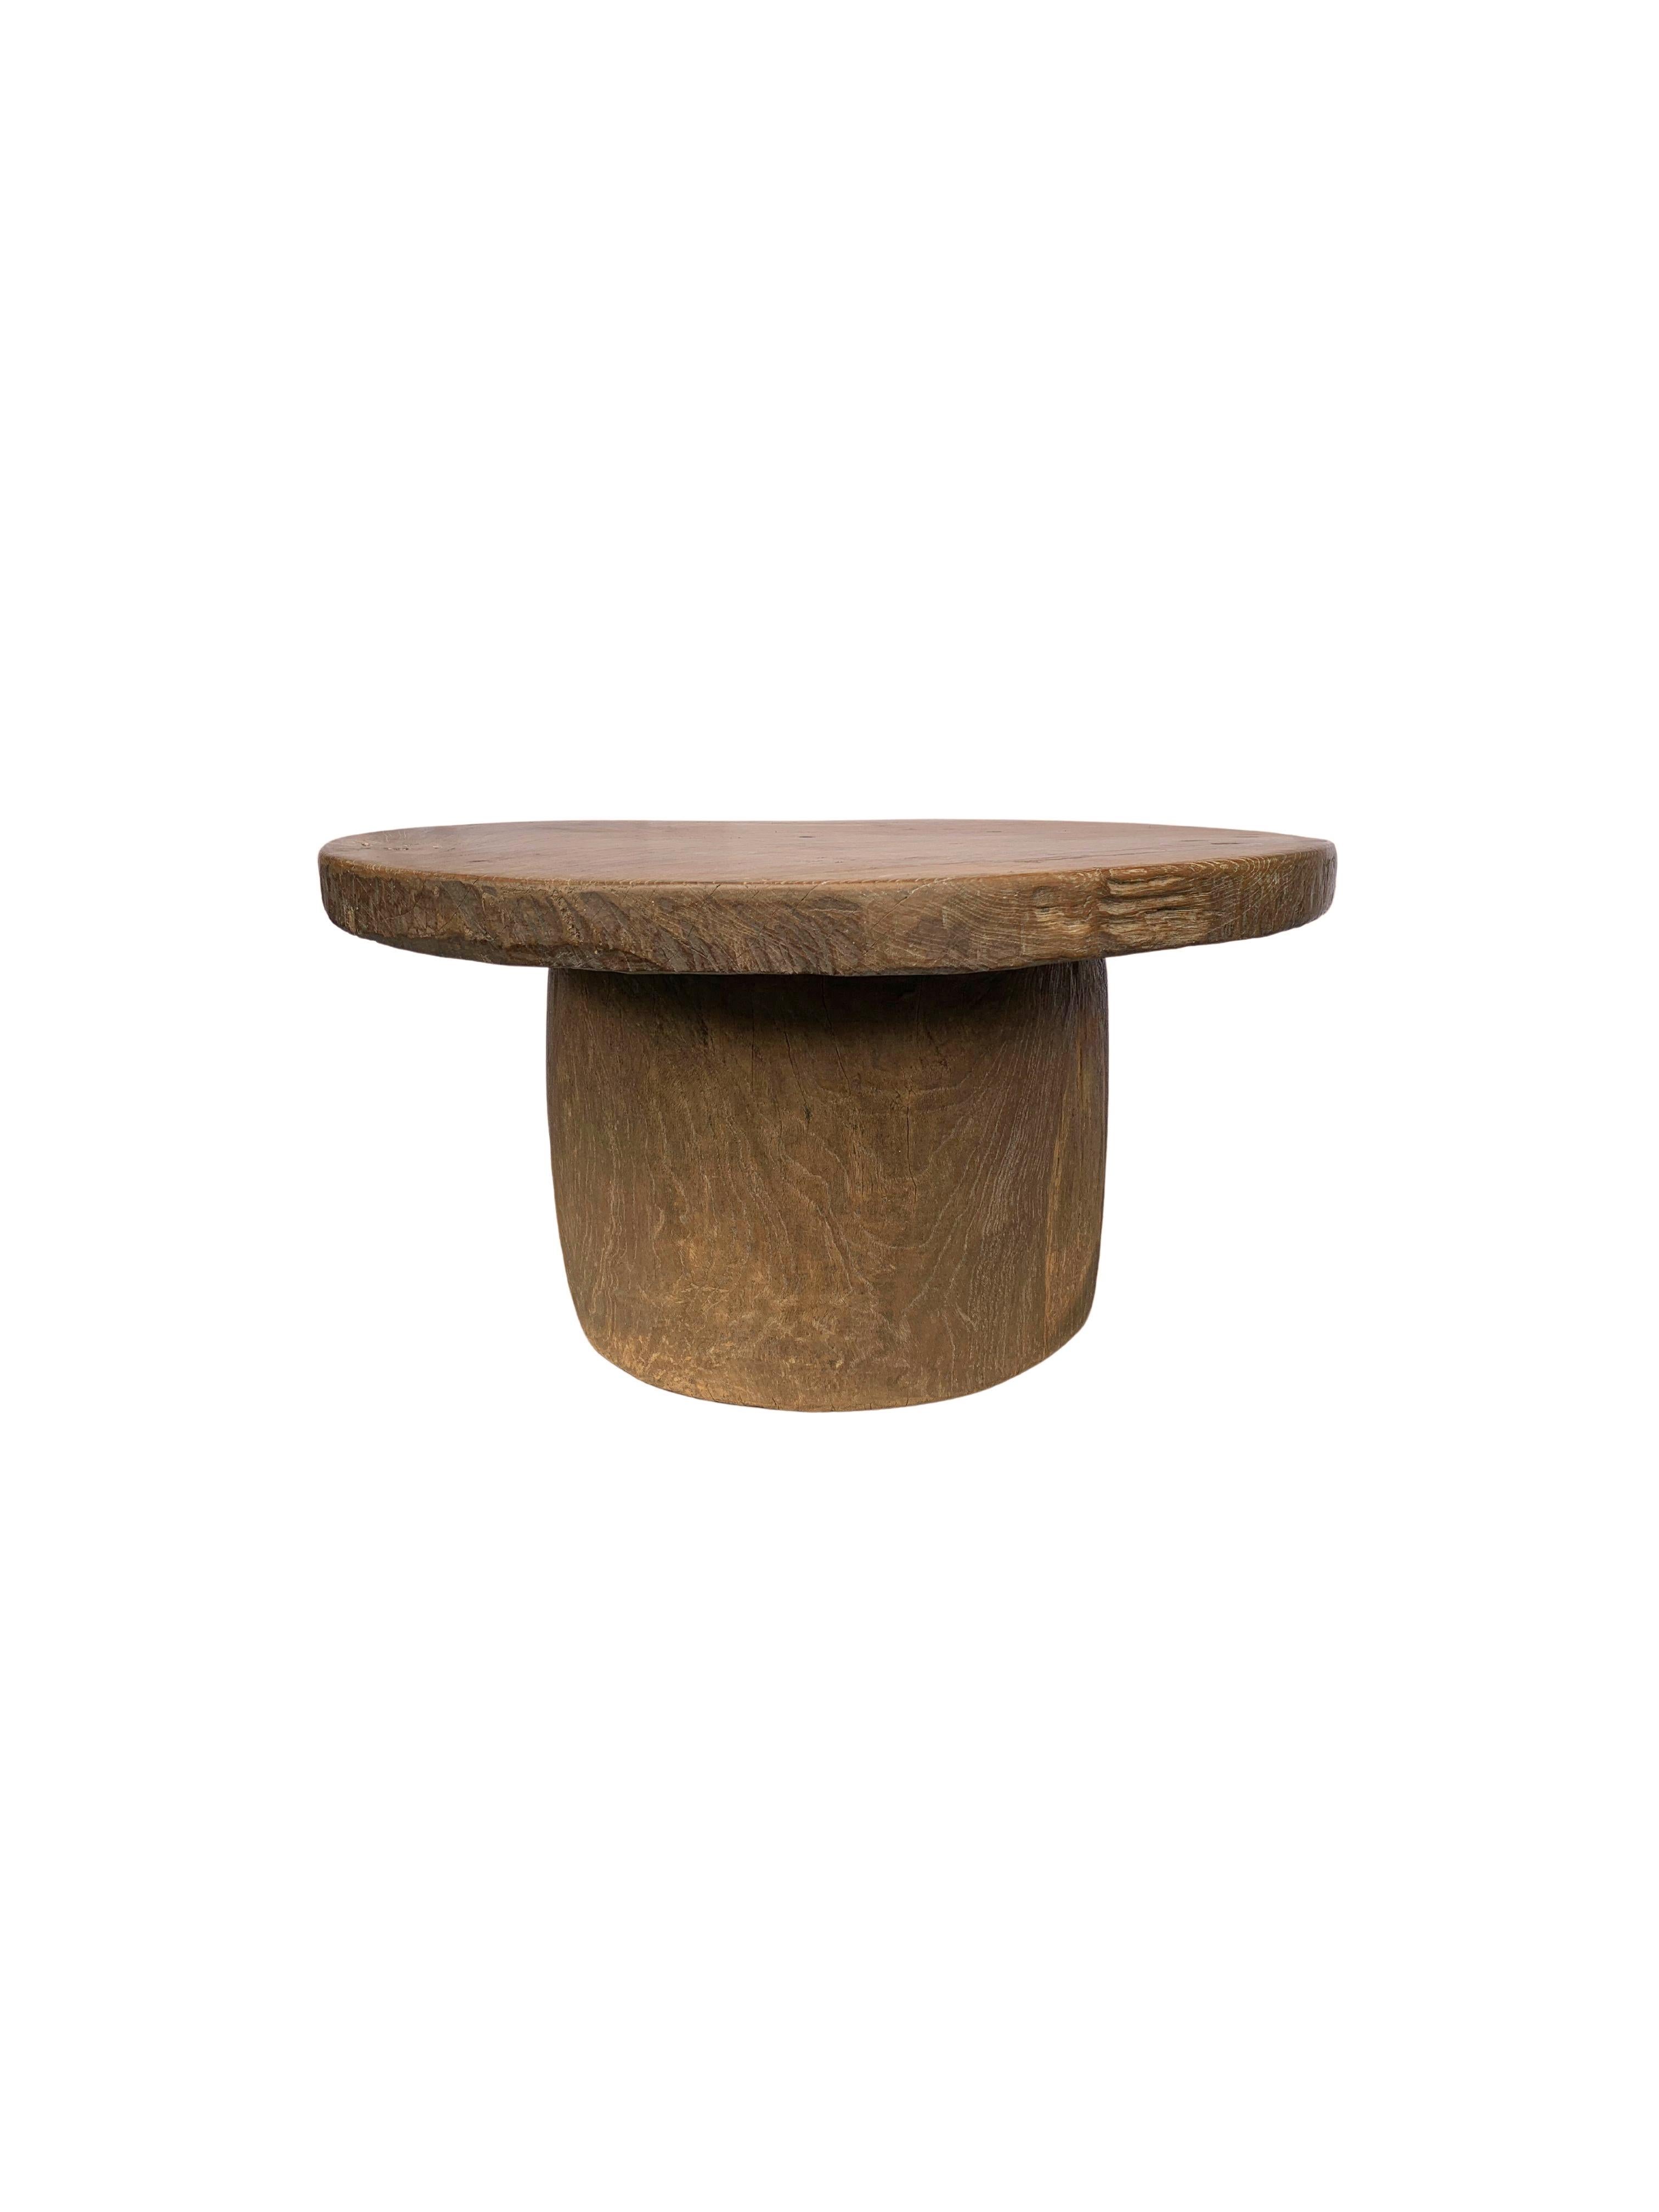 This teak round table was crafted on the island of Madura off the Northeastern coast of Java, Indonesia. It features a hollow base, that was crafted from a single block of wood. The Table top, which is solid and heavy was also crafted from a single